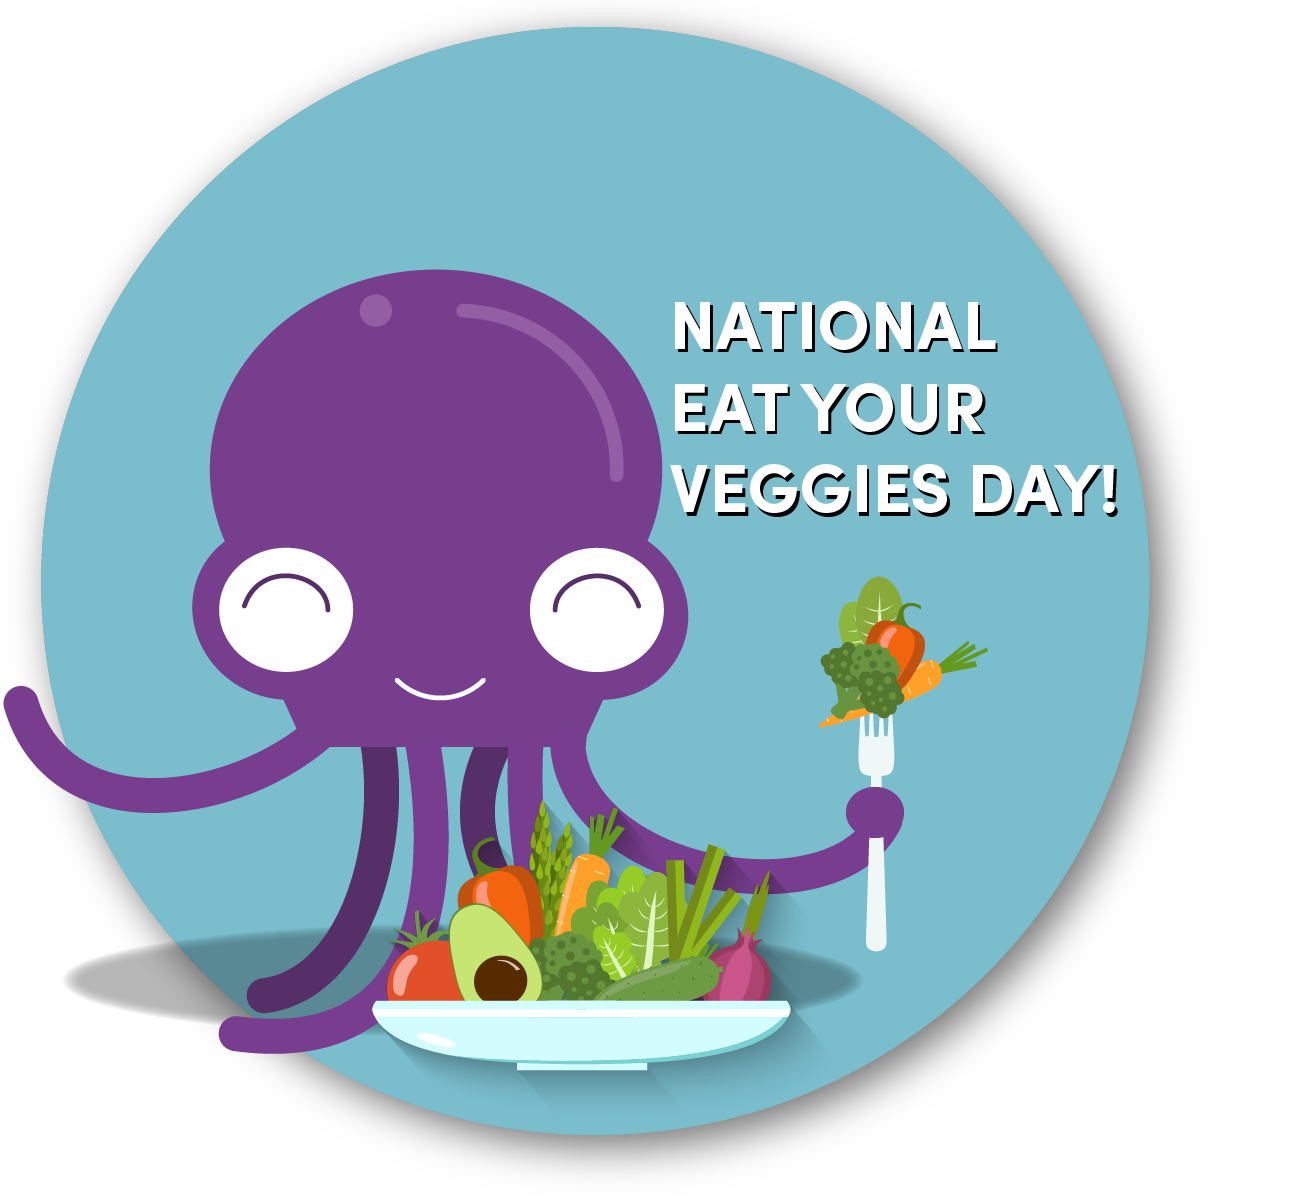 National Eat Your Veggies Day 2020